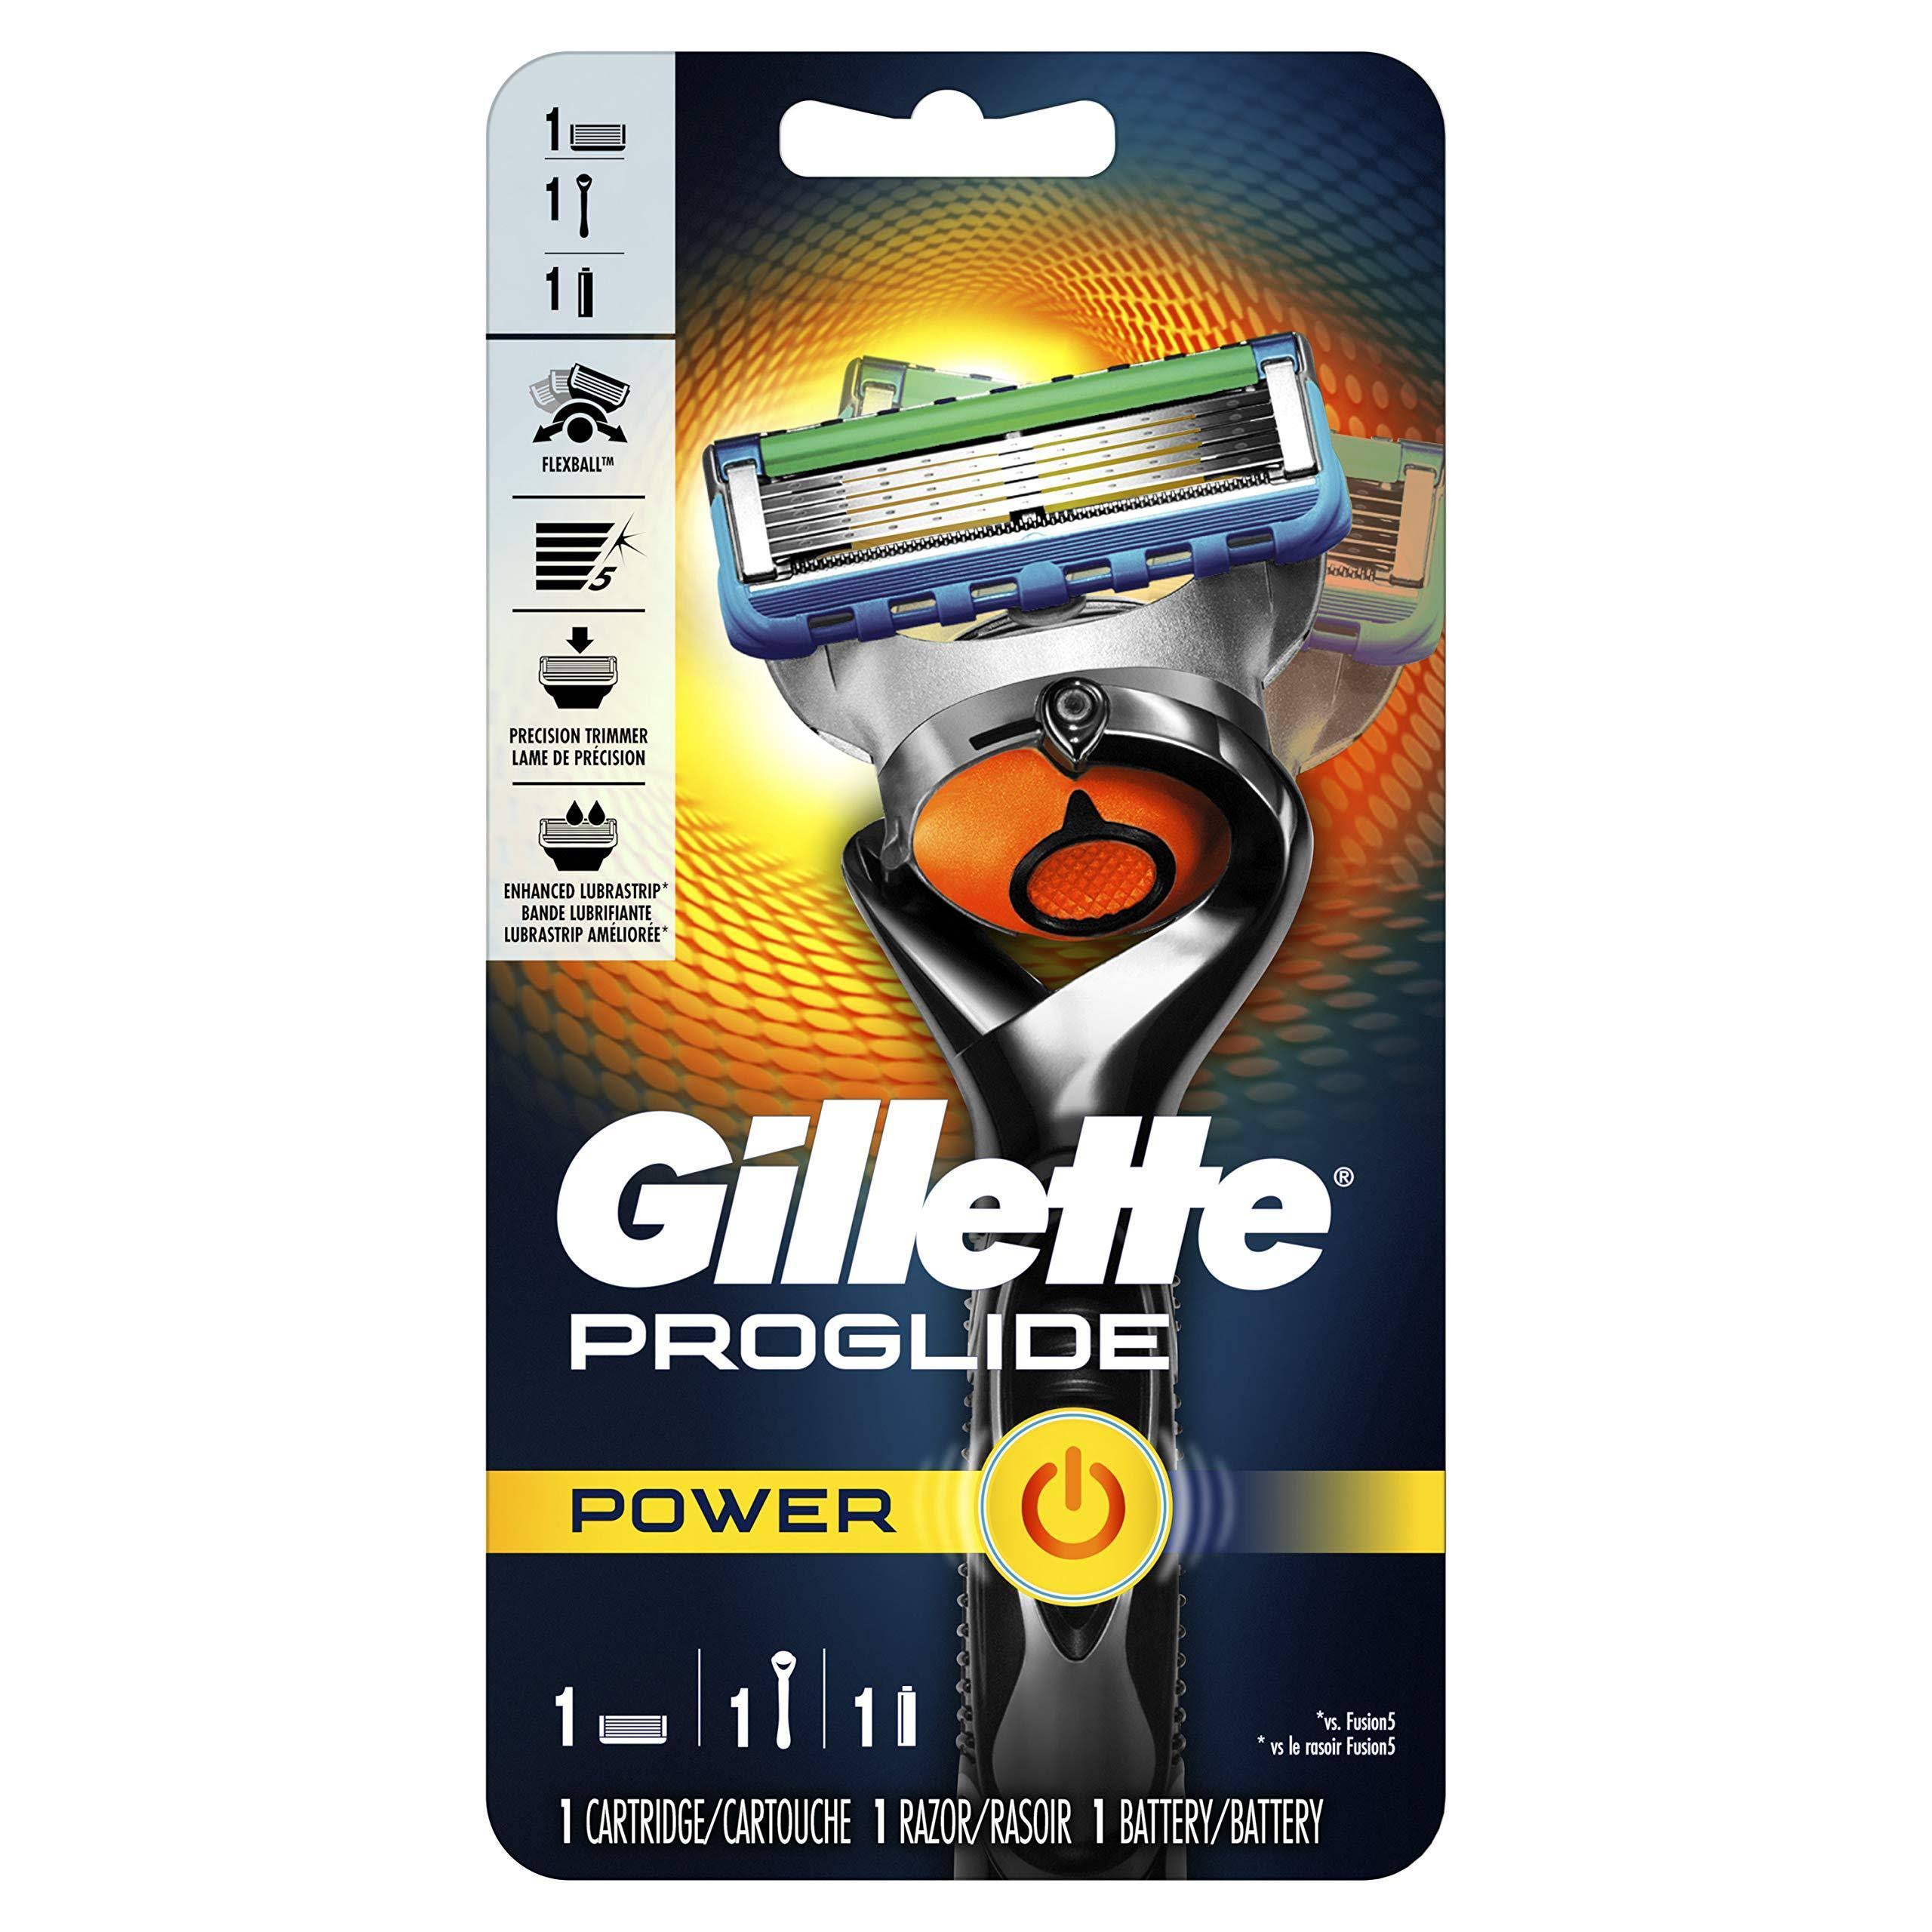 Gillette Fusion5 ProGlide Power Razor - with 1 Cartridge and 1 Battery